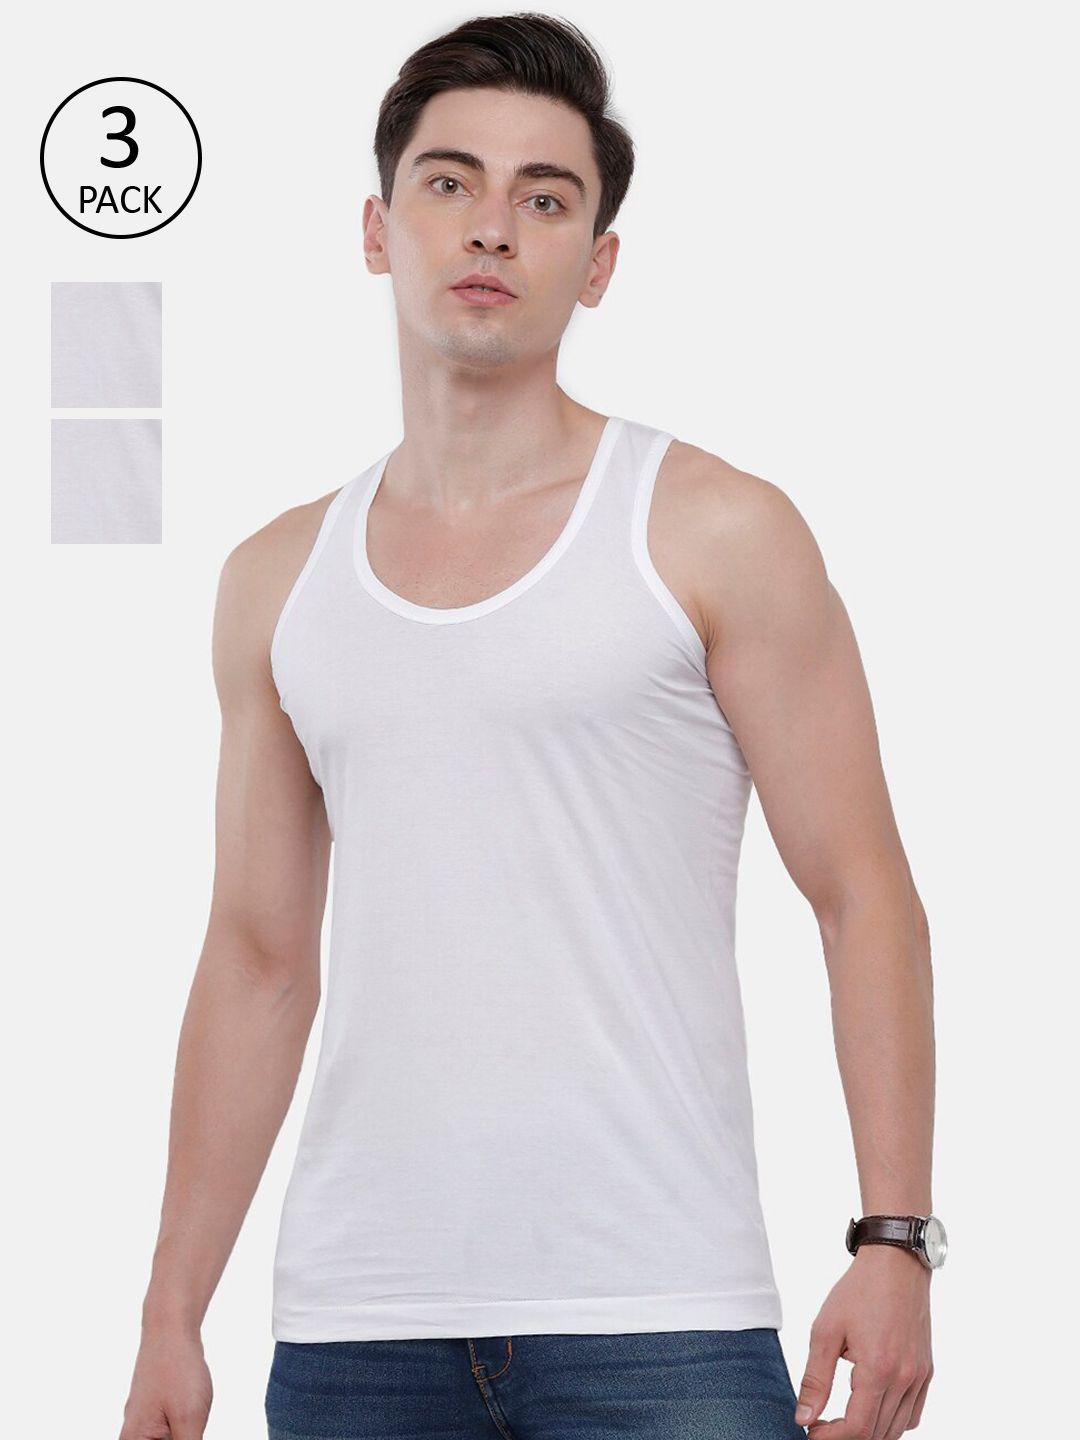 classic polo men pack of 3 white solid slim-fit innerwear vests